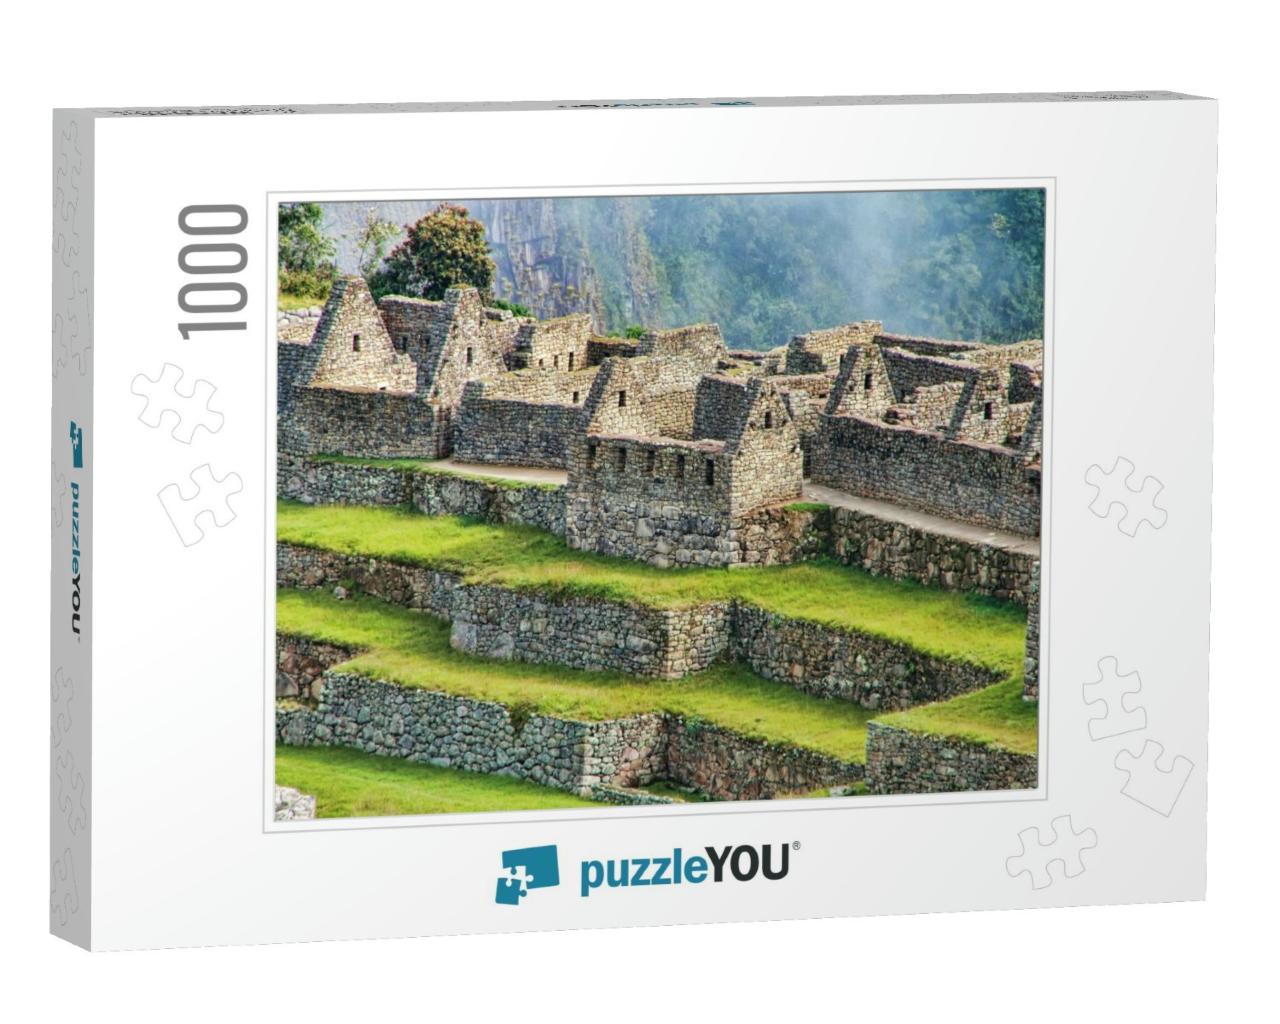 Close View of the Ruins At Machu Picchu Citadel in Peru... Jigsaw Puzzle with 1000 pieces